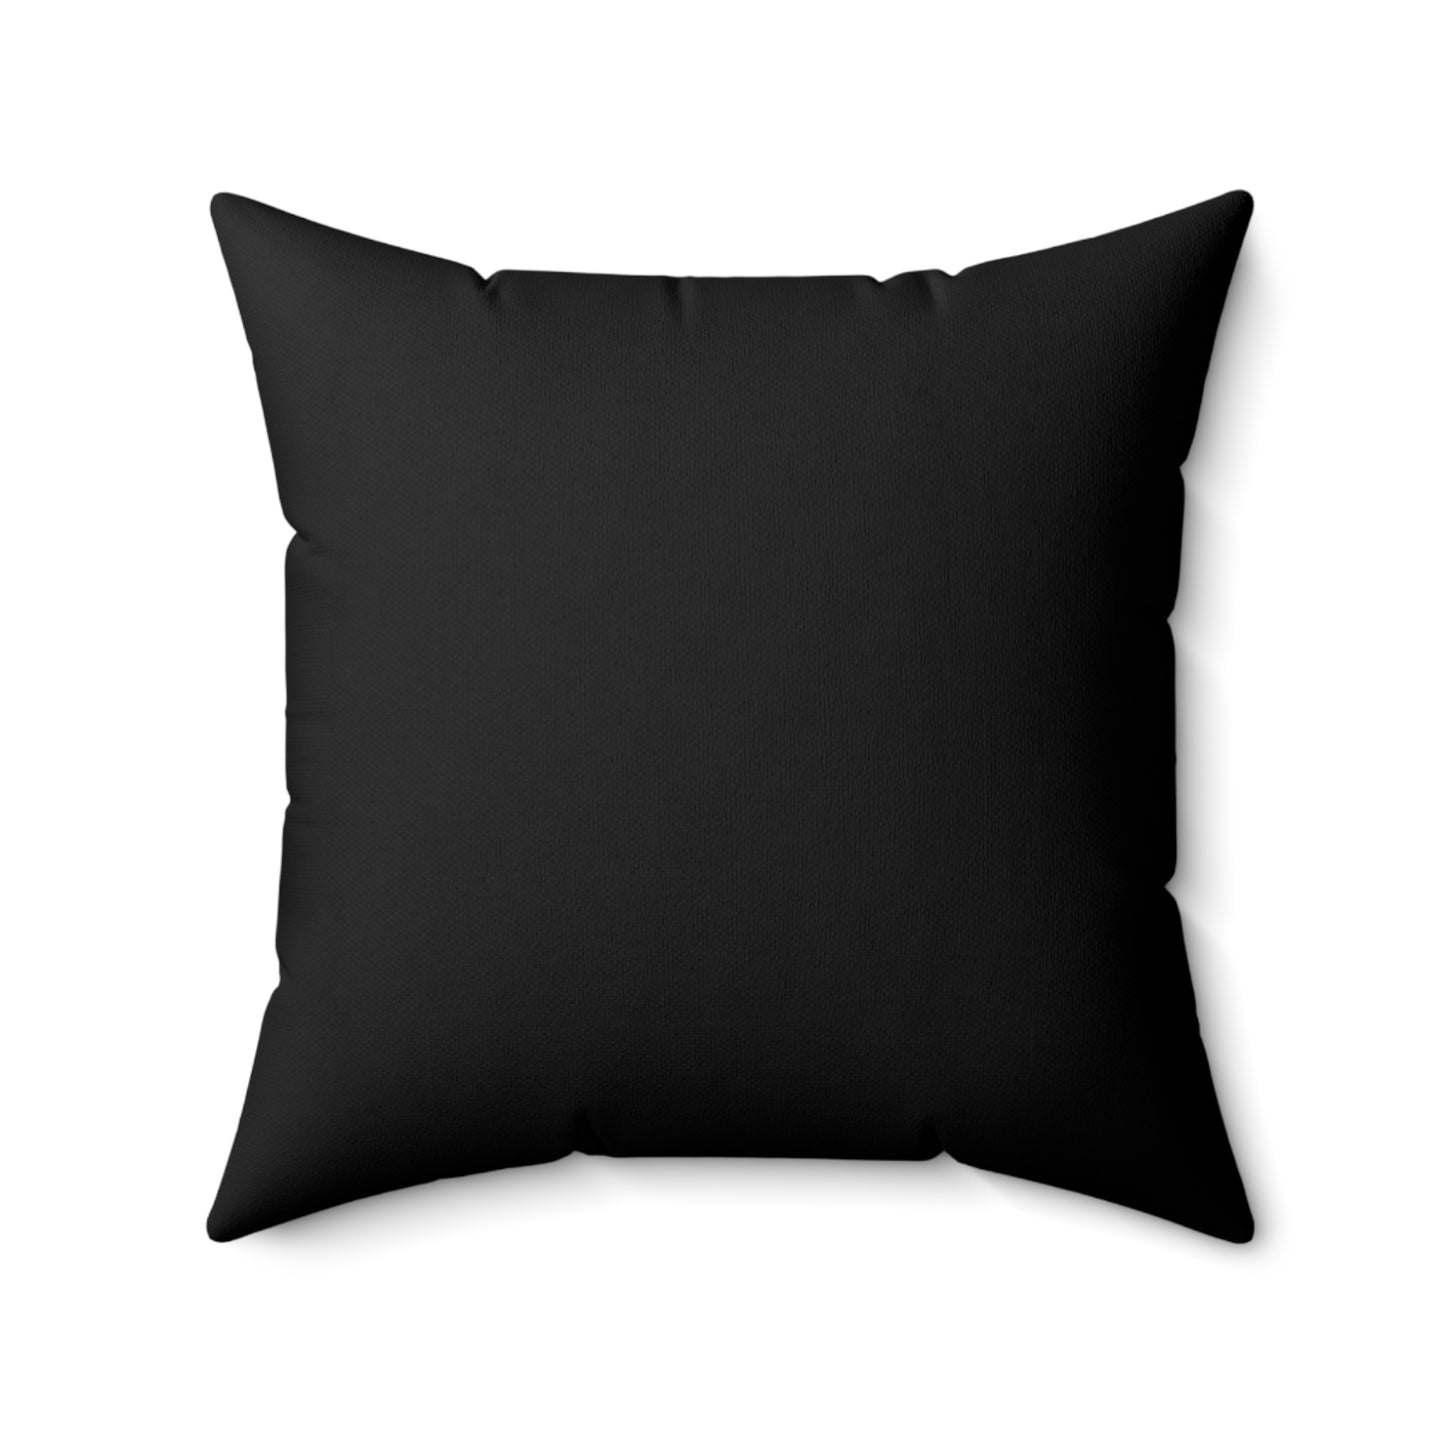 VHS Collection Throw Pillow